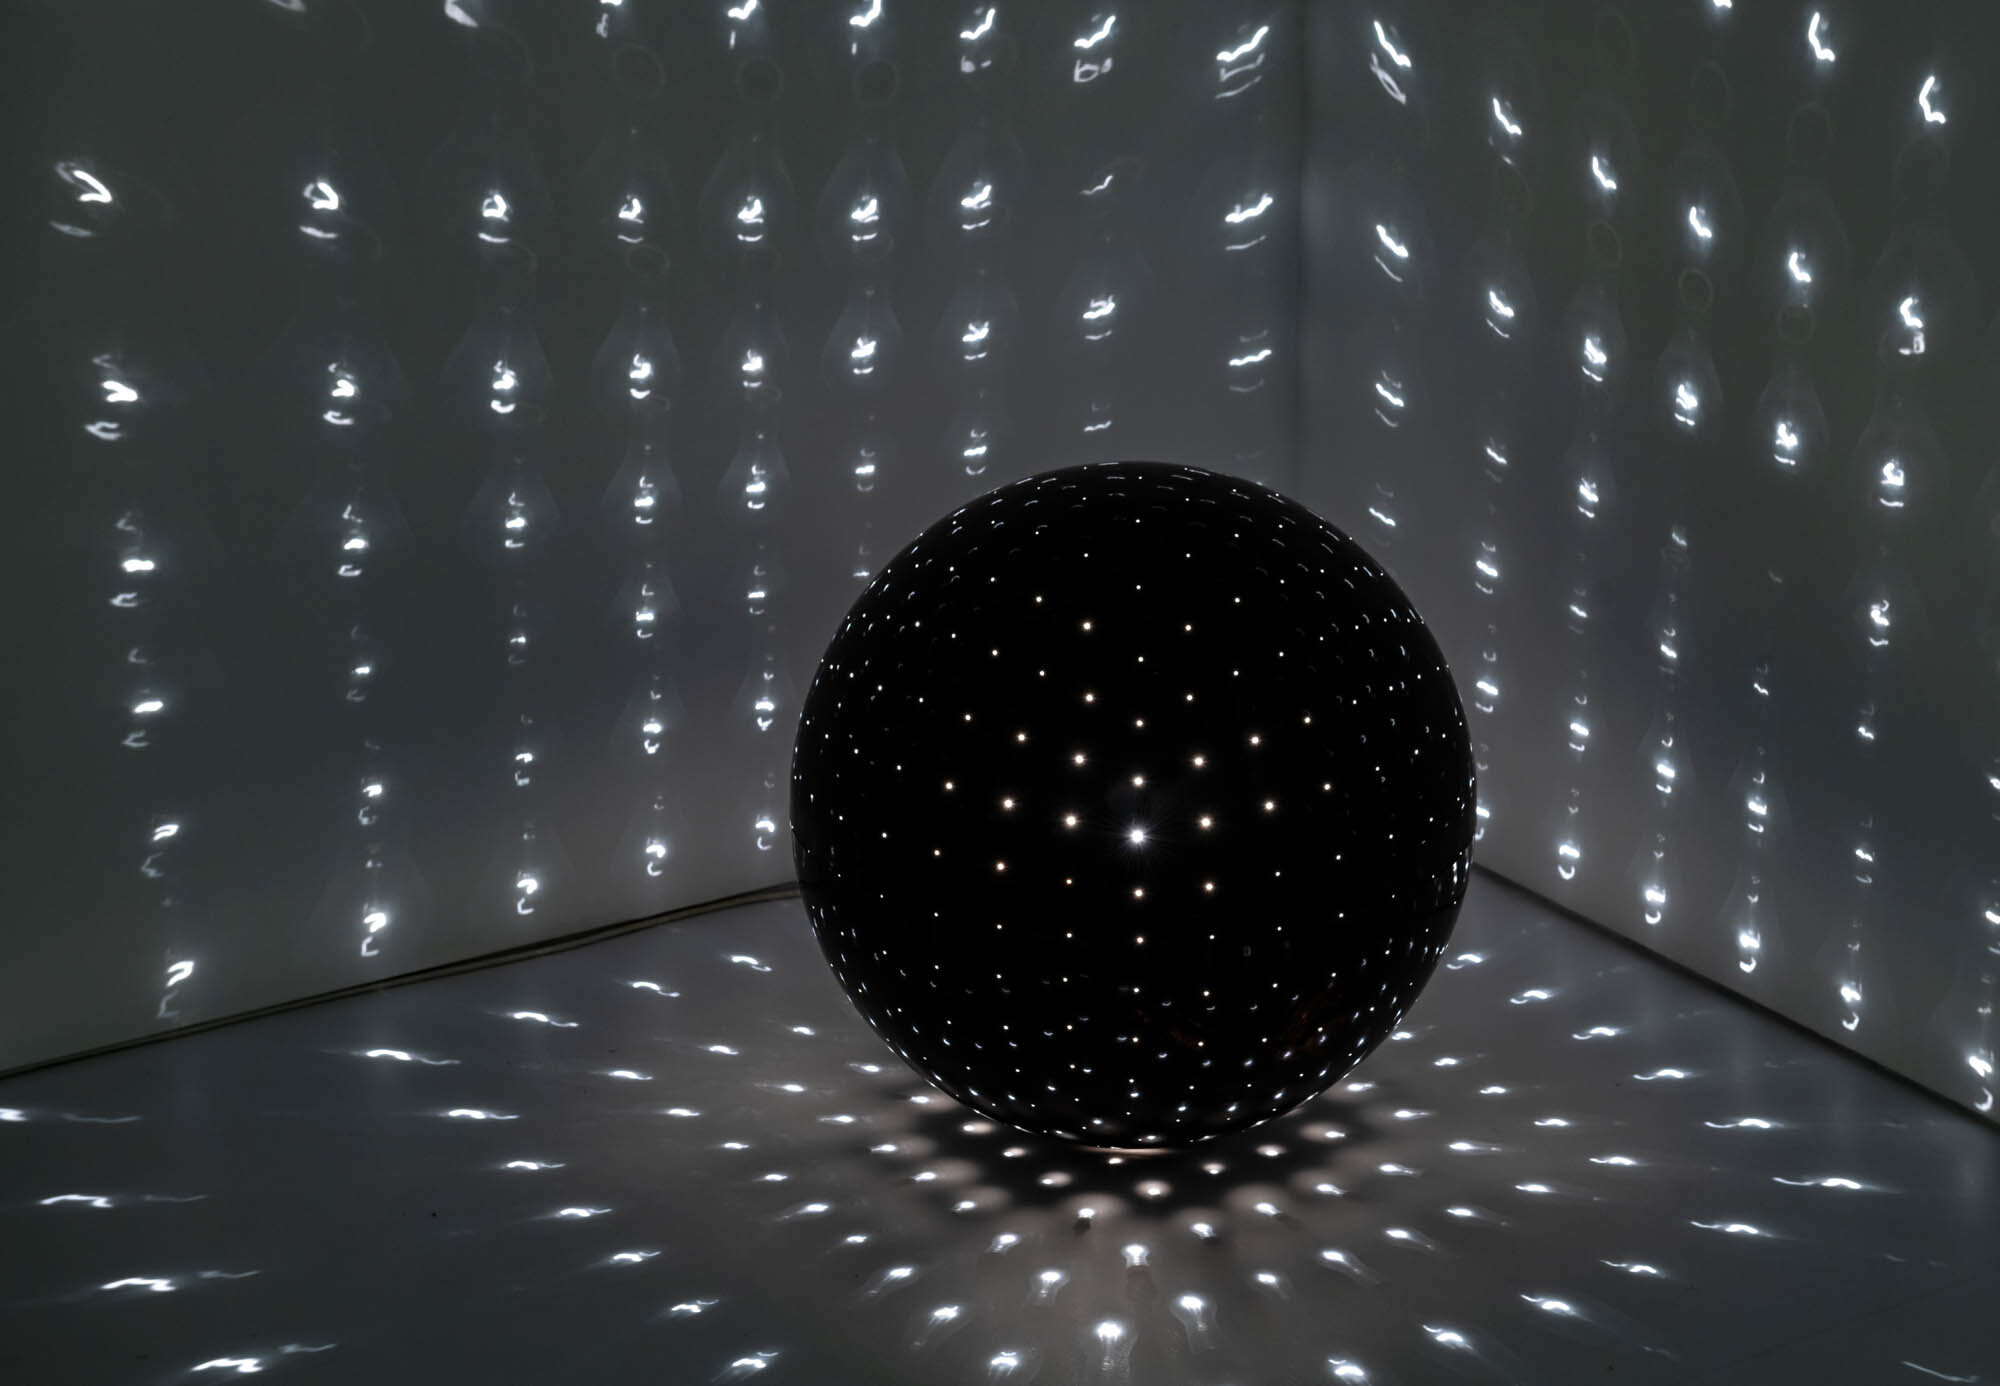 BILL CULBERT, “CUBIC PROJECTIONS” (INSTALLATION), 1990. AUCKLAND ART GALLERY TOI O TĀMAKI, PURCHASED 1990. AUCKLAND ART GALLERY TOI O TĀMAKI 2021